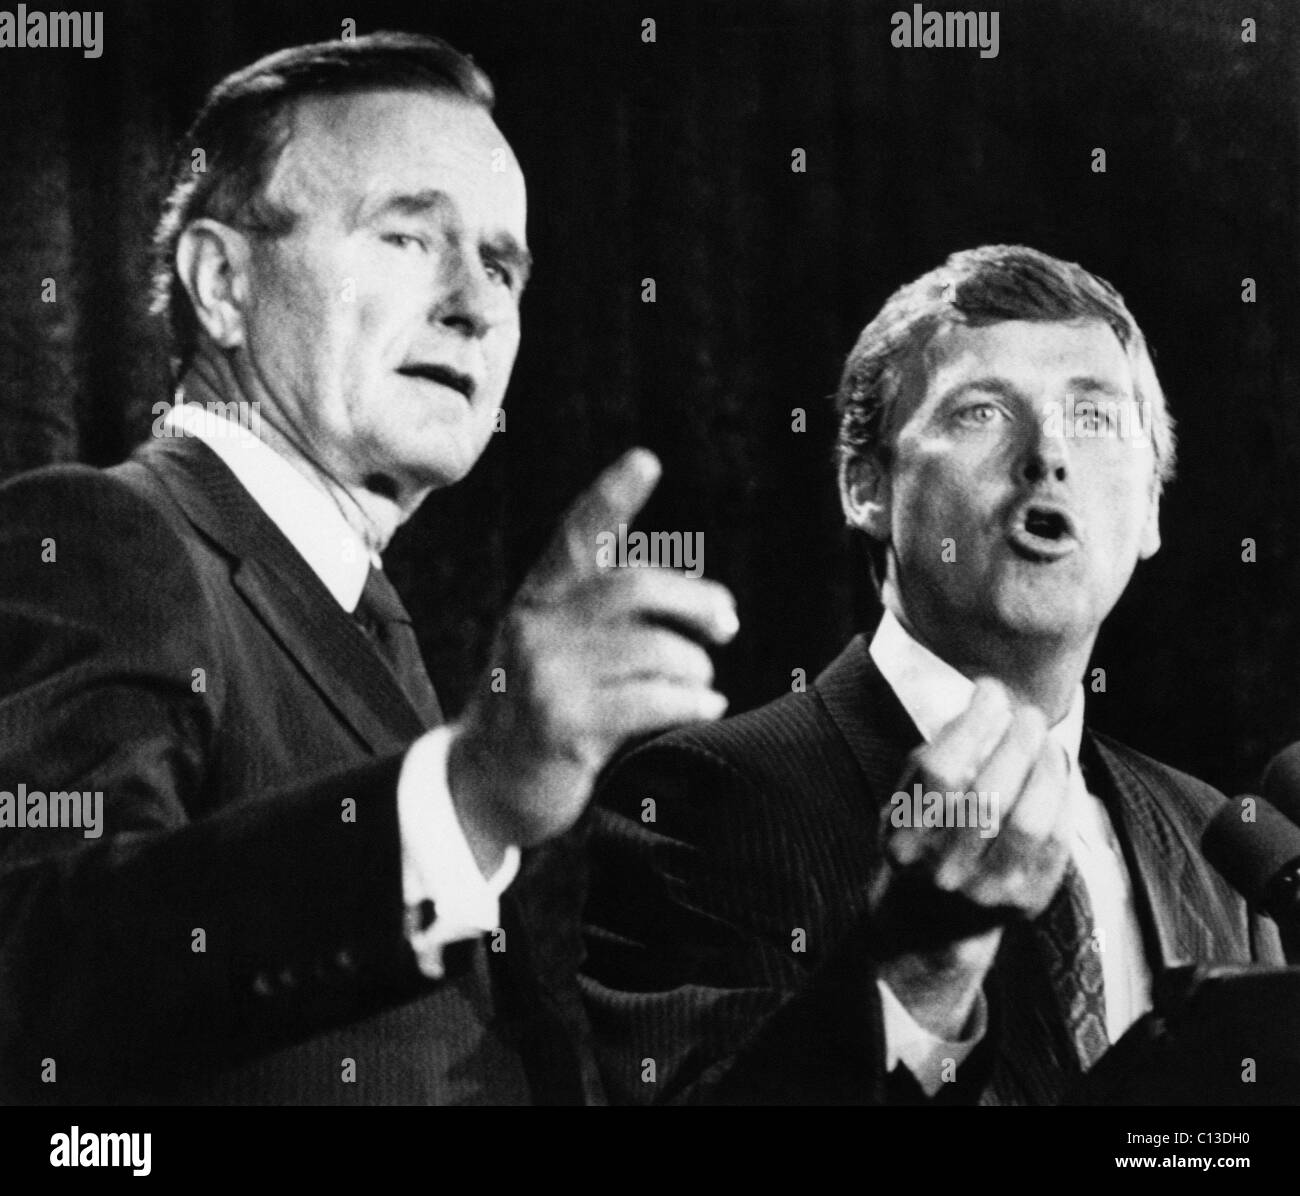 Bush Sr. Presidency. Vice President and Republican presidential nominee (and future US President) George H.W. Bush and US Senator (and future Vice President) Dan Quayle at the Republican National Convention in New Orleans, Louisiana, August 1988. Stock Photo